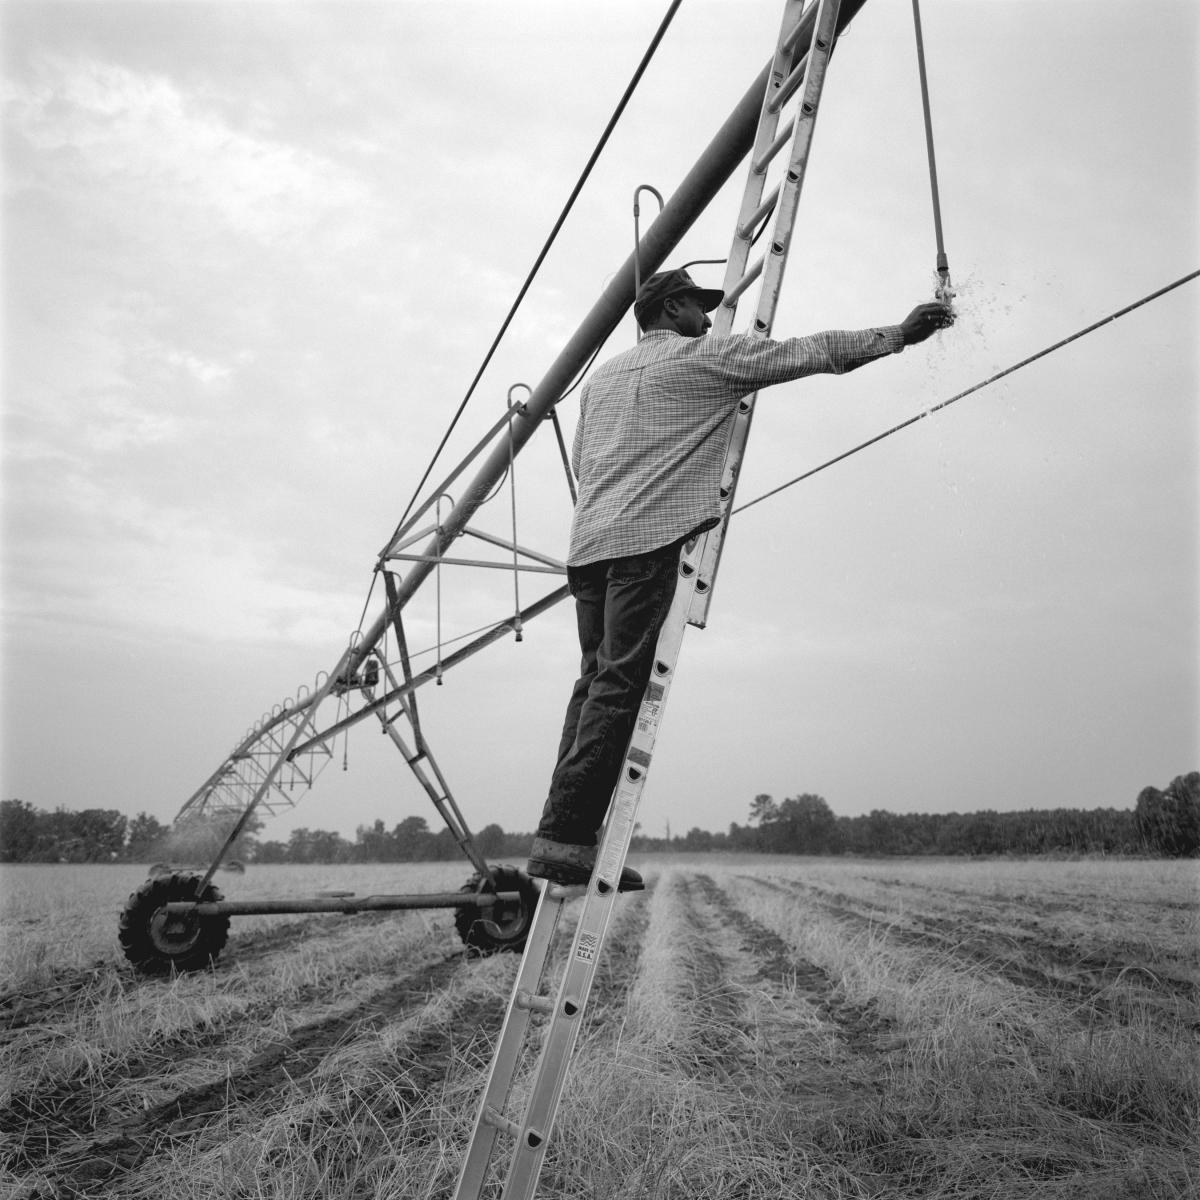 <p><center>Macon County, Georgia:</center></p>
Warren James fixes a nozzle on his newly installed irrigation system, which waters eighty acres." The irrigation system has helped, and having it is a plus with money lenders. It also allows greater flexibility choosing what crops you can plant in that field." : Images : AMERICAN BLACK FARMERS PROJECT - John Ficara